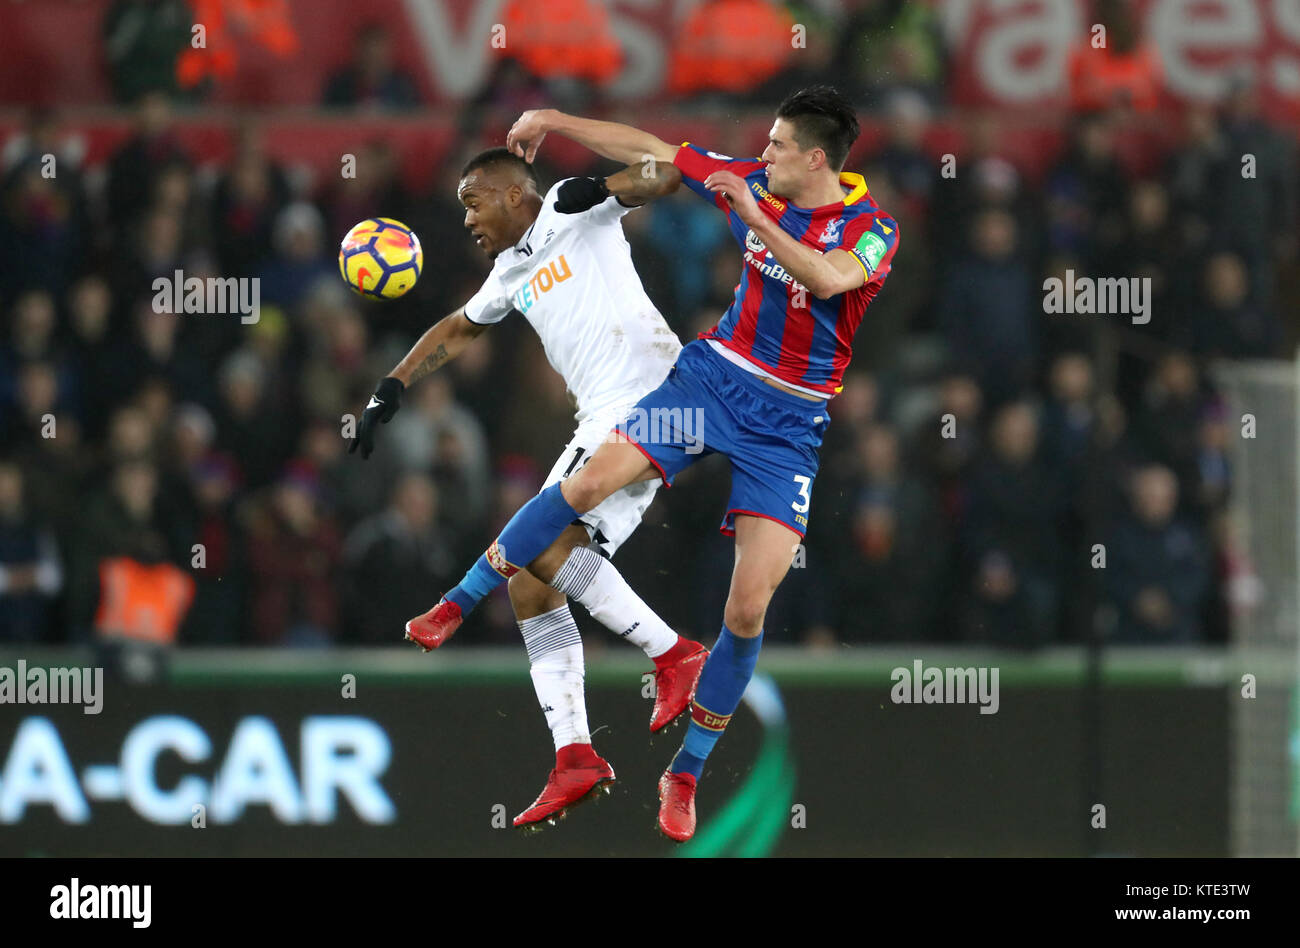 Crystal Palace's Martin Kelly (right) and Swansea City's Jordan Ayew battle for the ball during the Premier League match at the Liberty Stadium, Swansea. Stock Photo